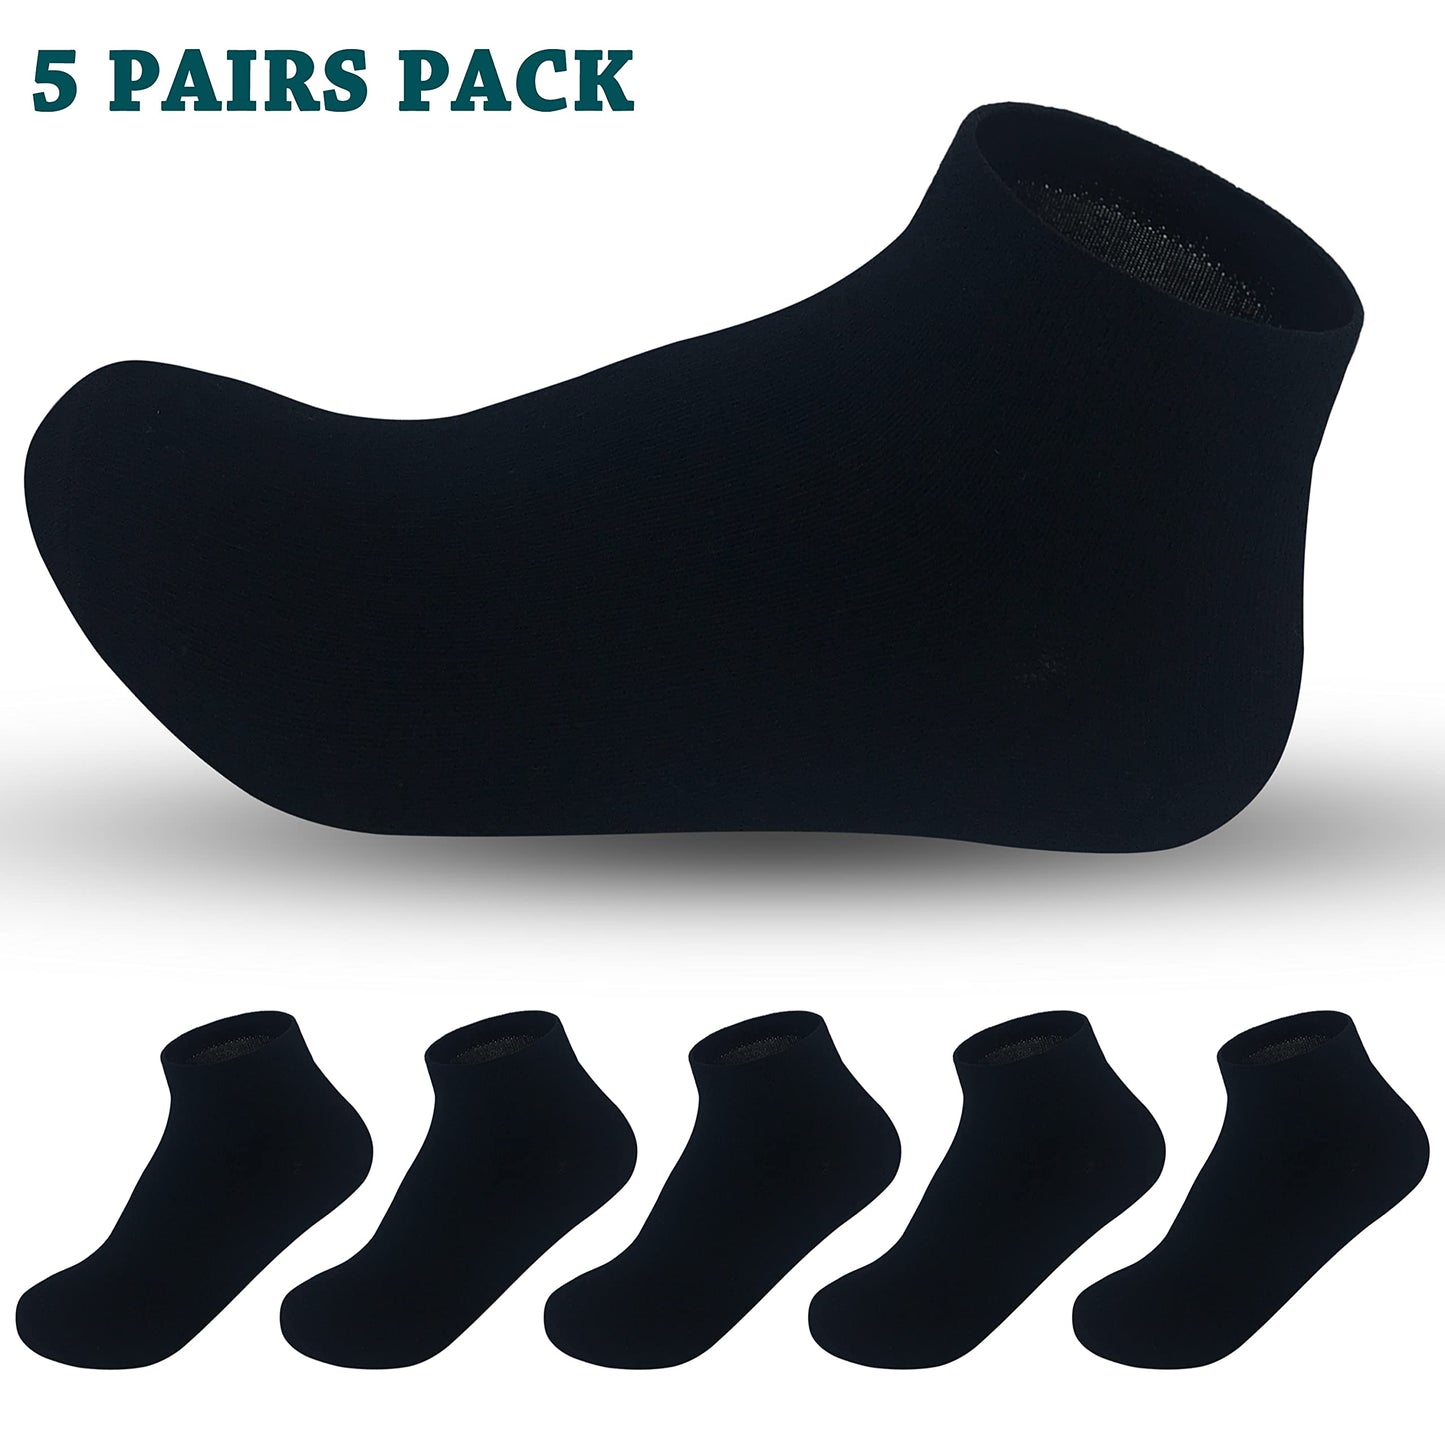 Boys & Girls Unisex Black Ankle Liners No Show Socks 5 Pairs Pack